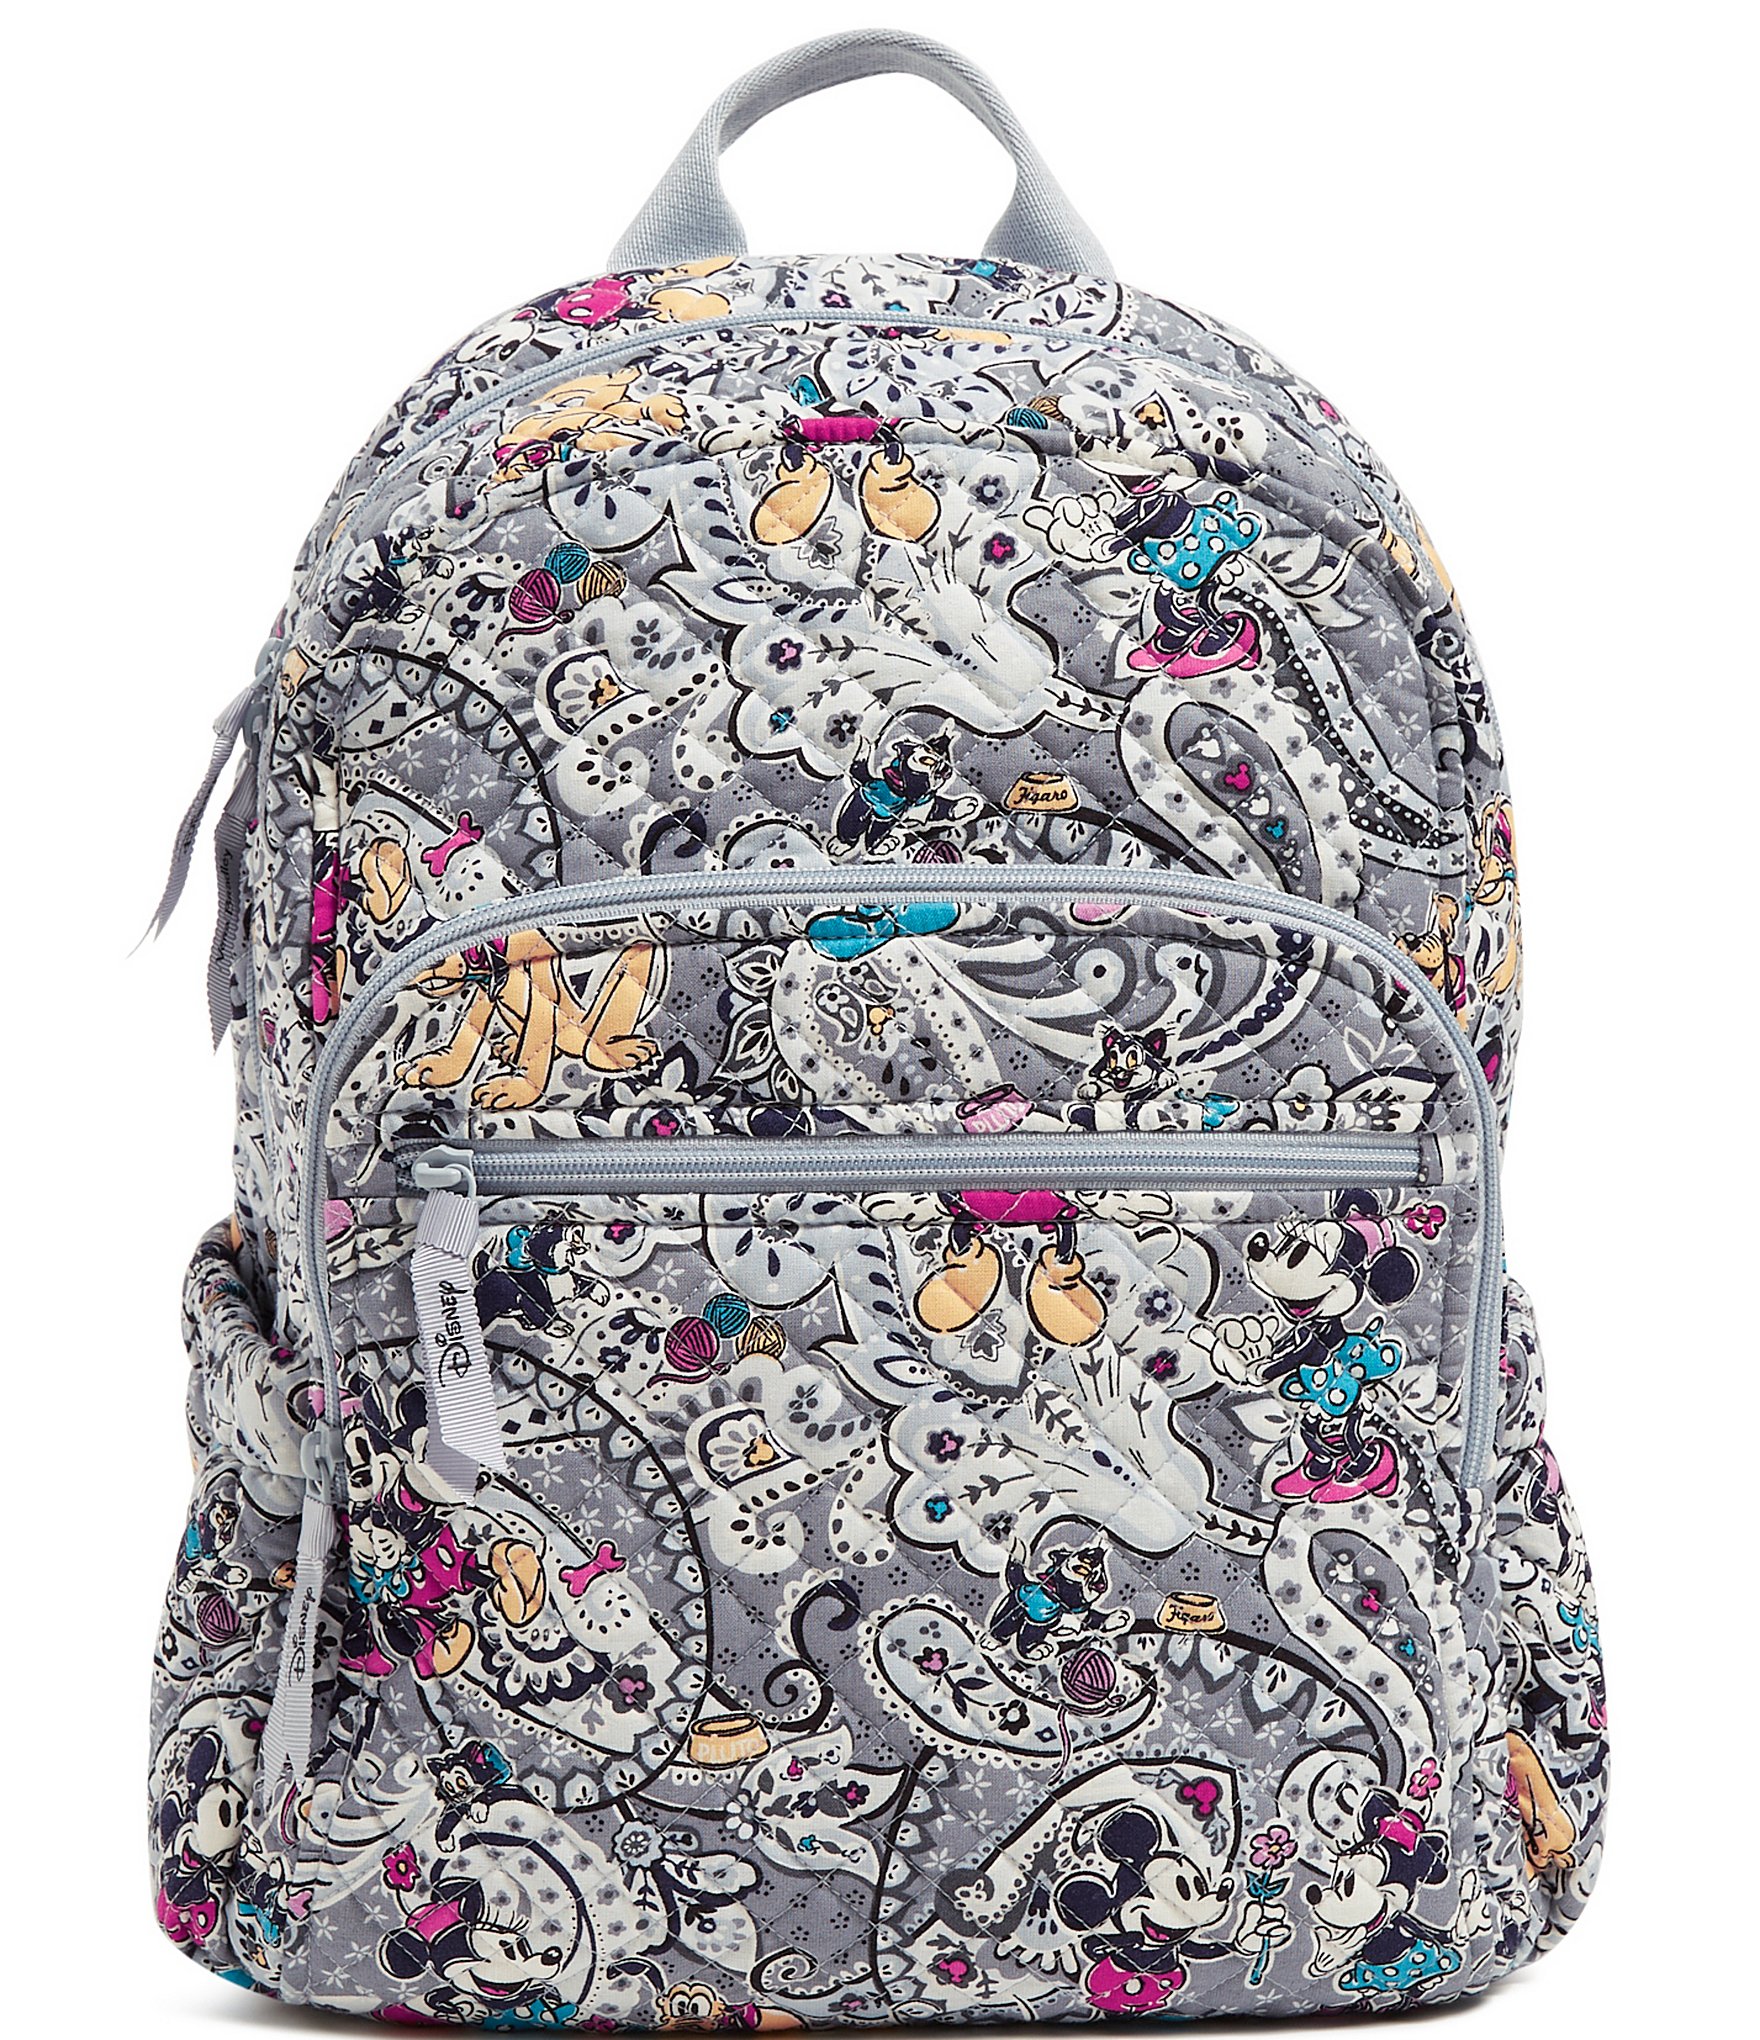 https://dimg.dillards.com/is/image/DillardsZoom/zoom/vera-bradley-disney-collection-mickey-mouse-piccadilly-paisley-campus-backpack/00000000_zi_2486e78b-2596-4801-85e9-e9df55f5787b.jpg